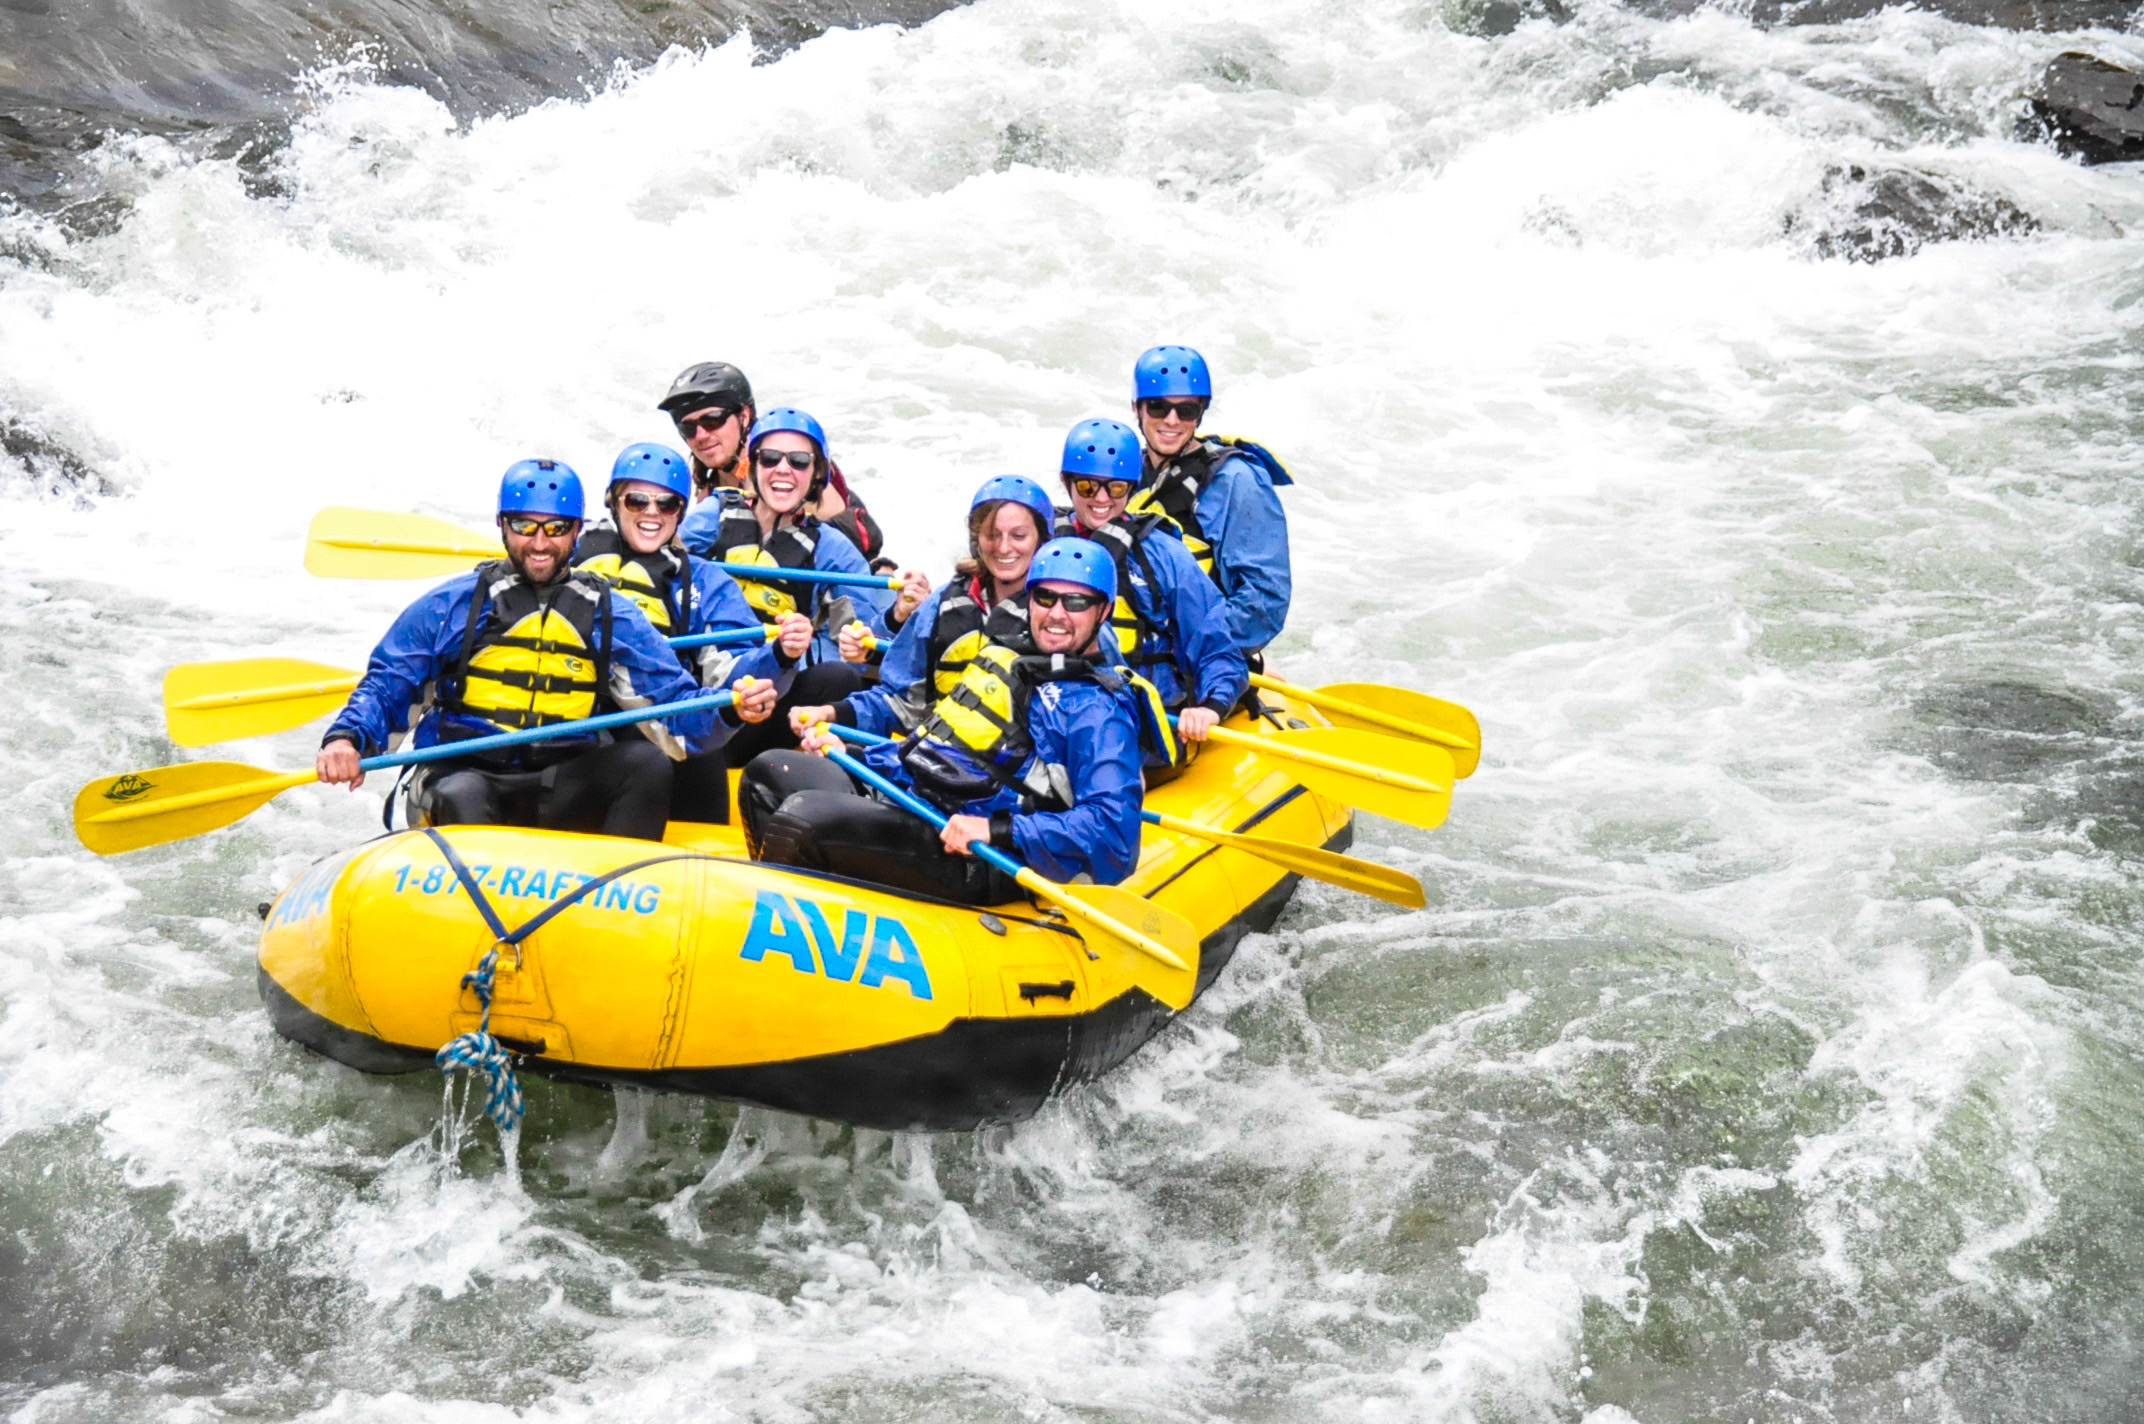 A group smiling while whitewater rafting